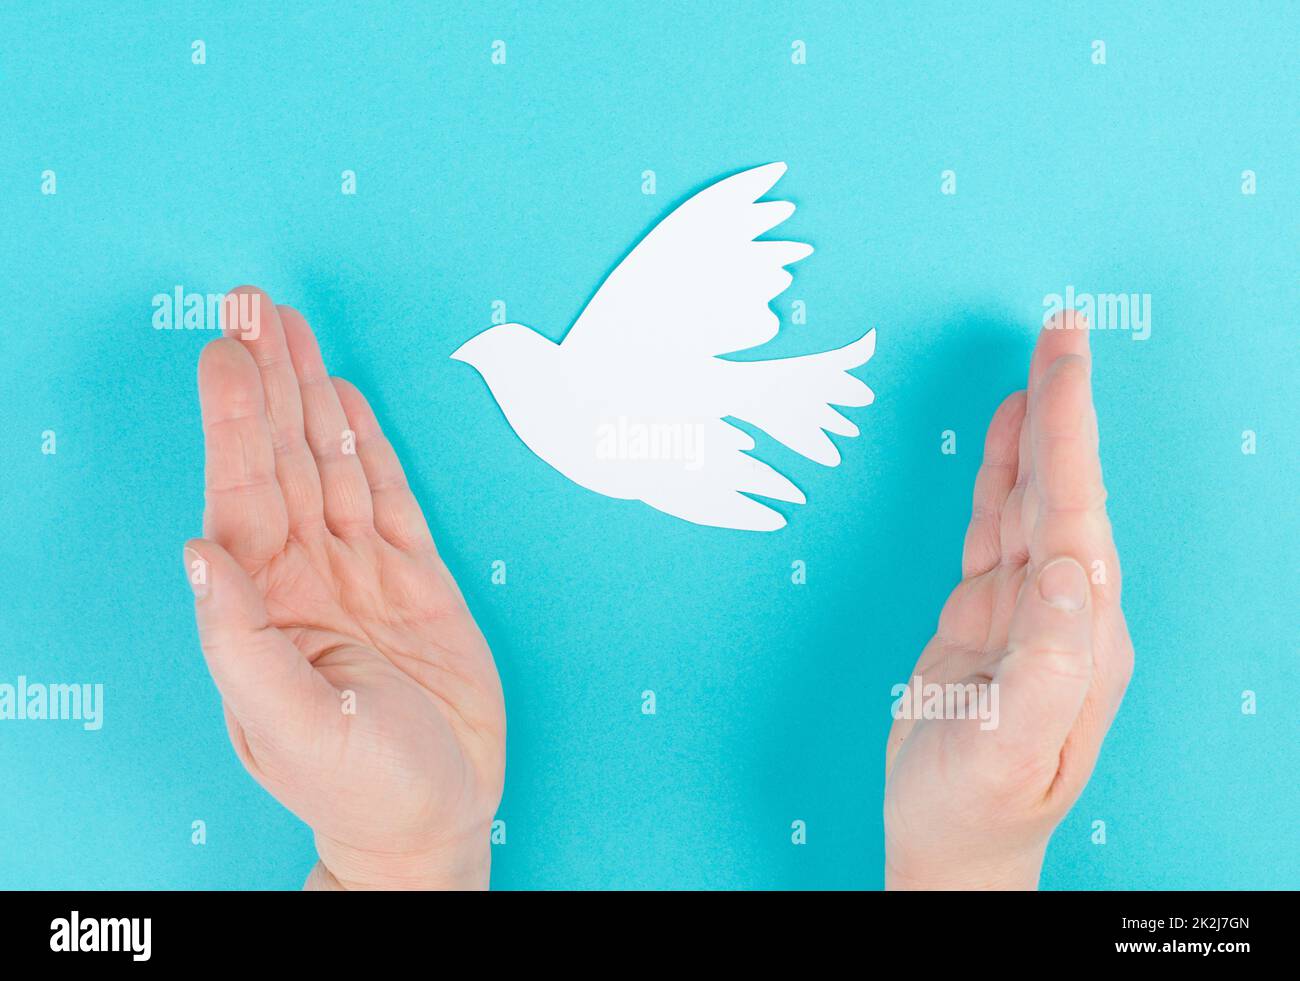 Holding a white dove in the hands, symbol of peace, paper cut out pigeon, copy space for text, blue colored background Stock Photo